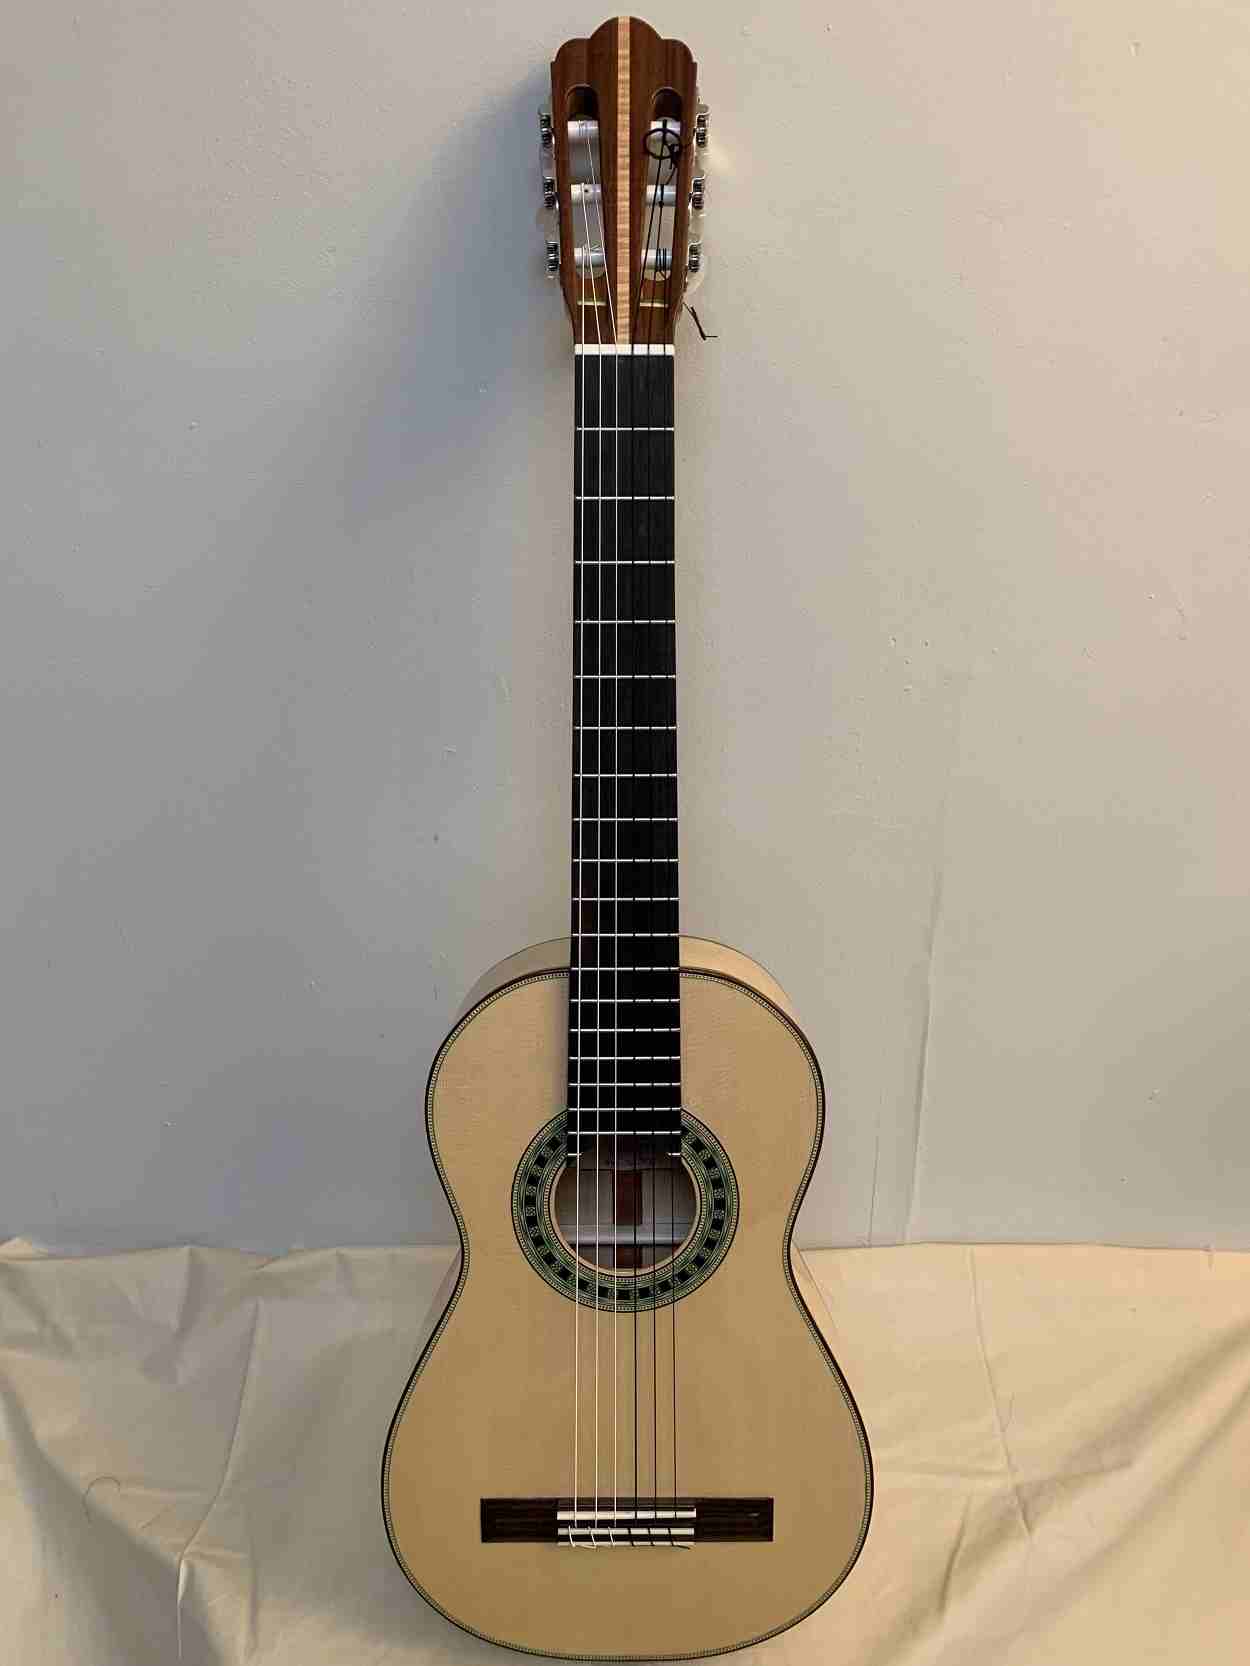 A classical guitar Torres FE17 style model